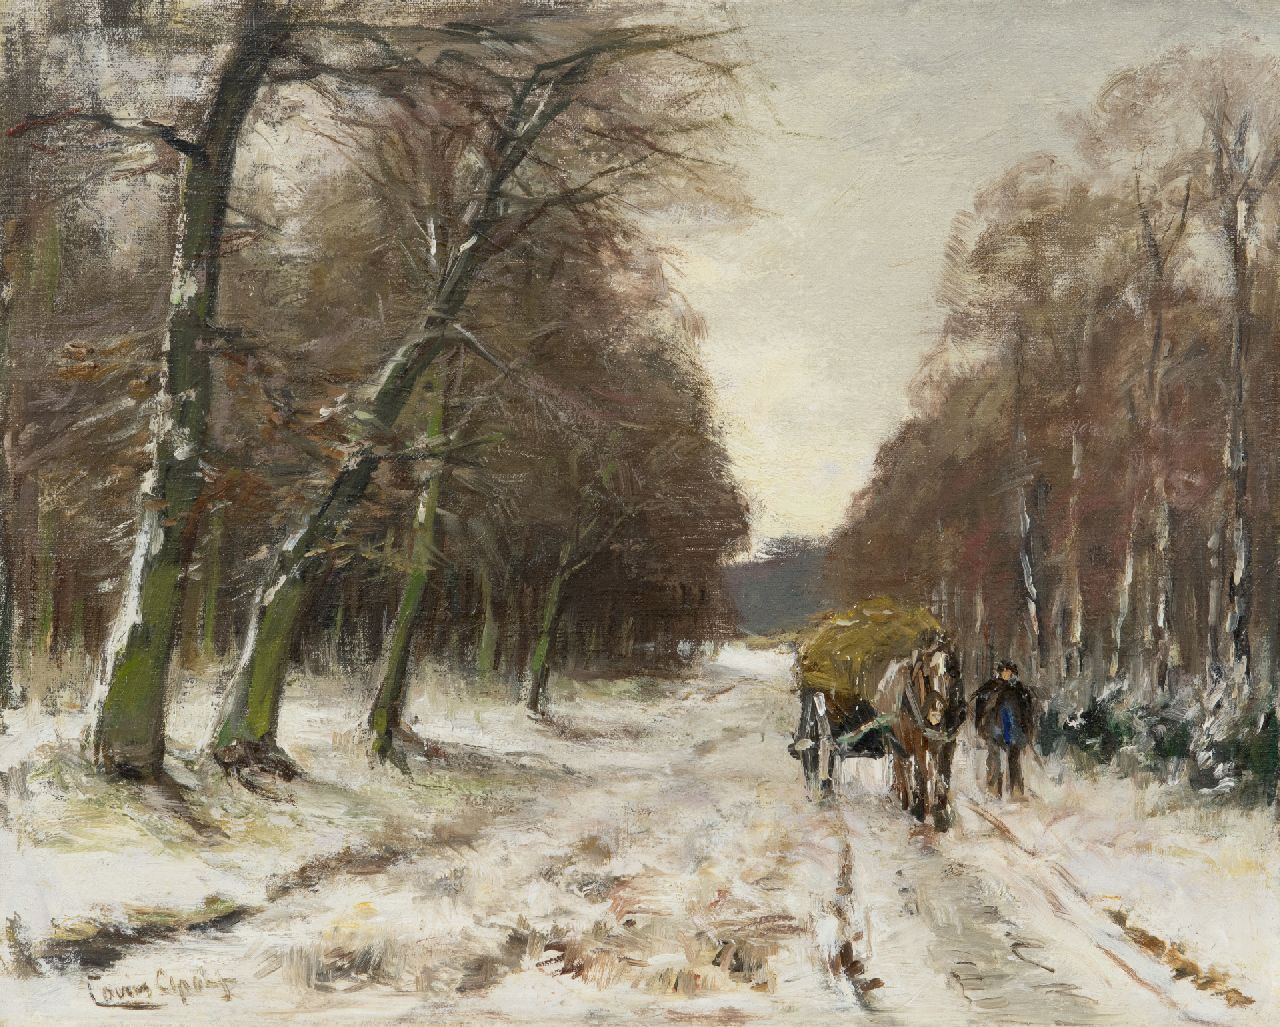 Apol L.F.H.  | Lodewijk Franciscus Hendrik 'Louis' Apol, Man with hay cart in a snowy forest, oil on canvas 32.6 x 40.5 cm, signed l.l.